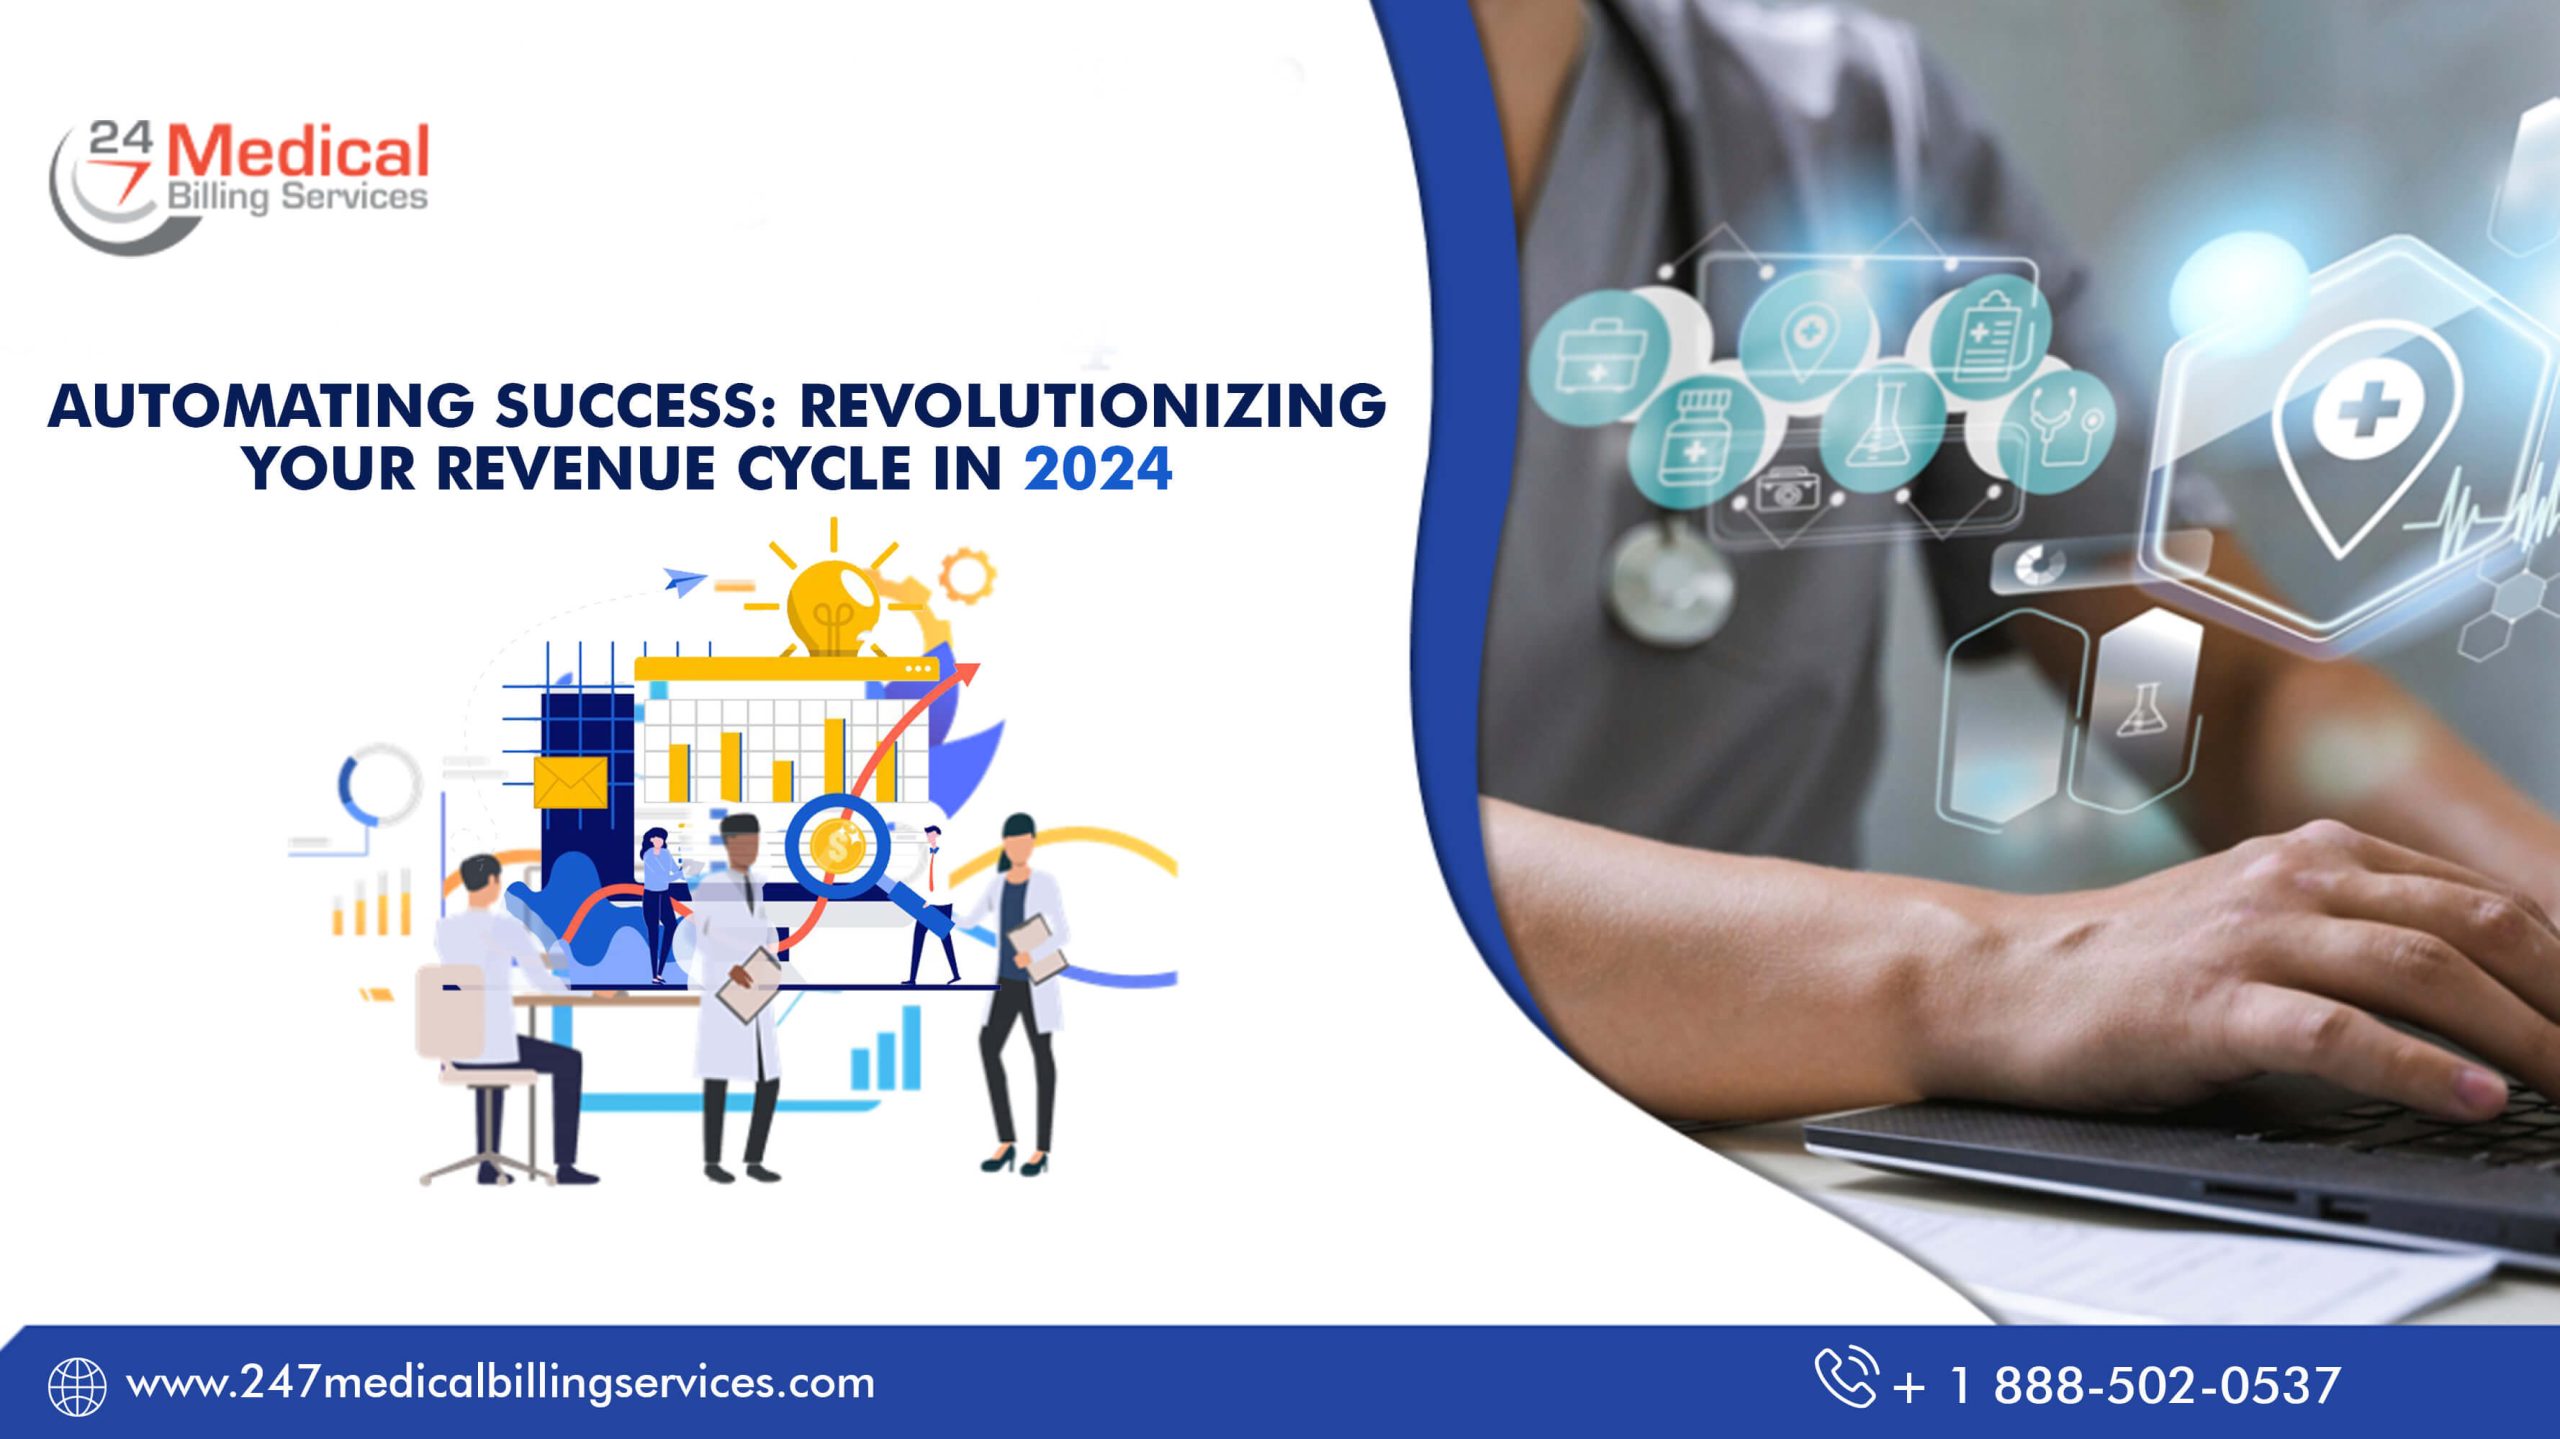  Automating Success: Revolutionizing Your Revenue Cycle in 2024